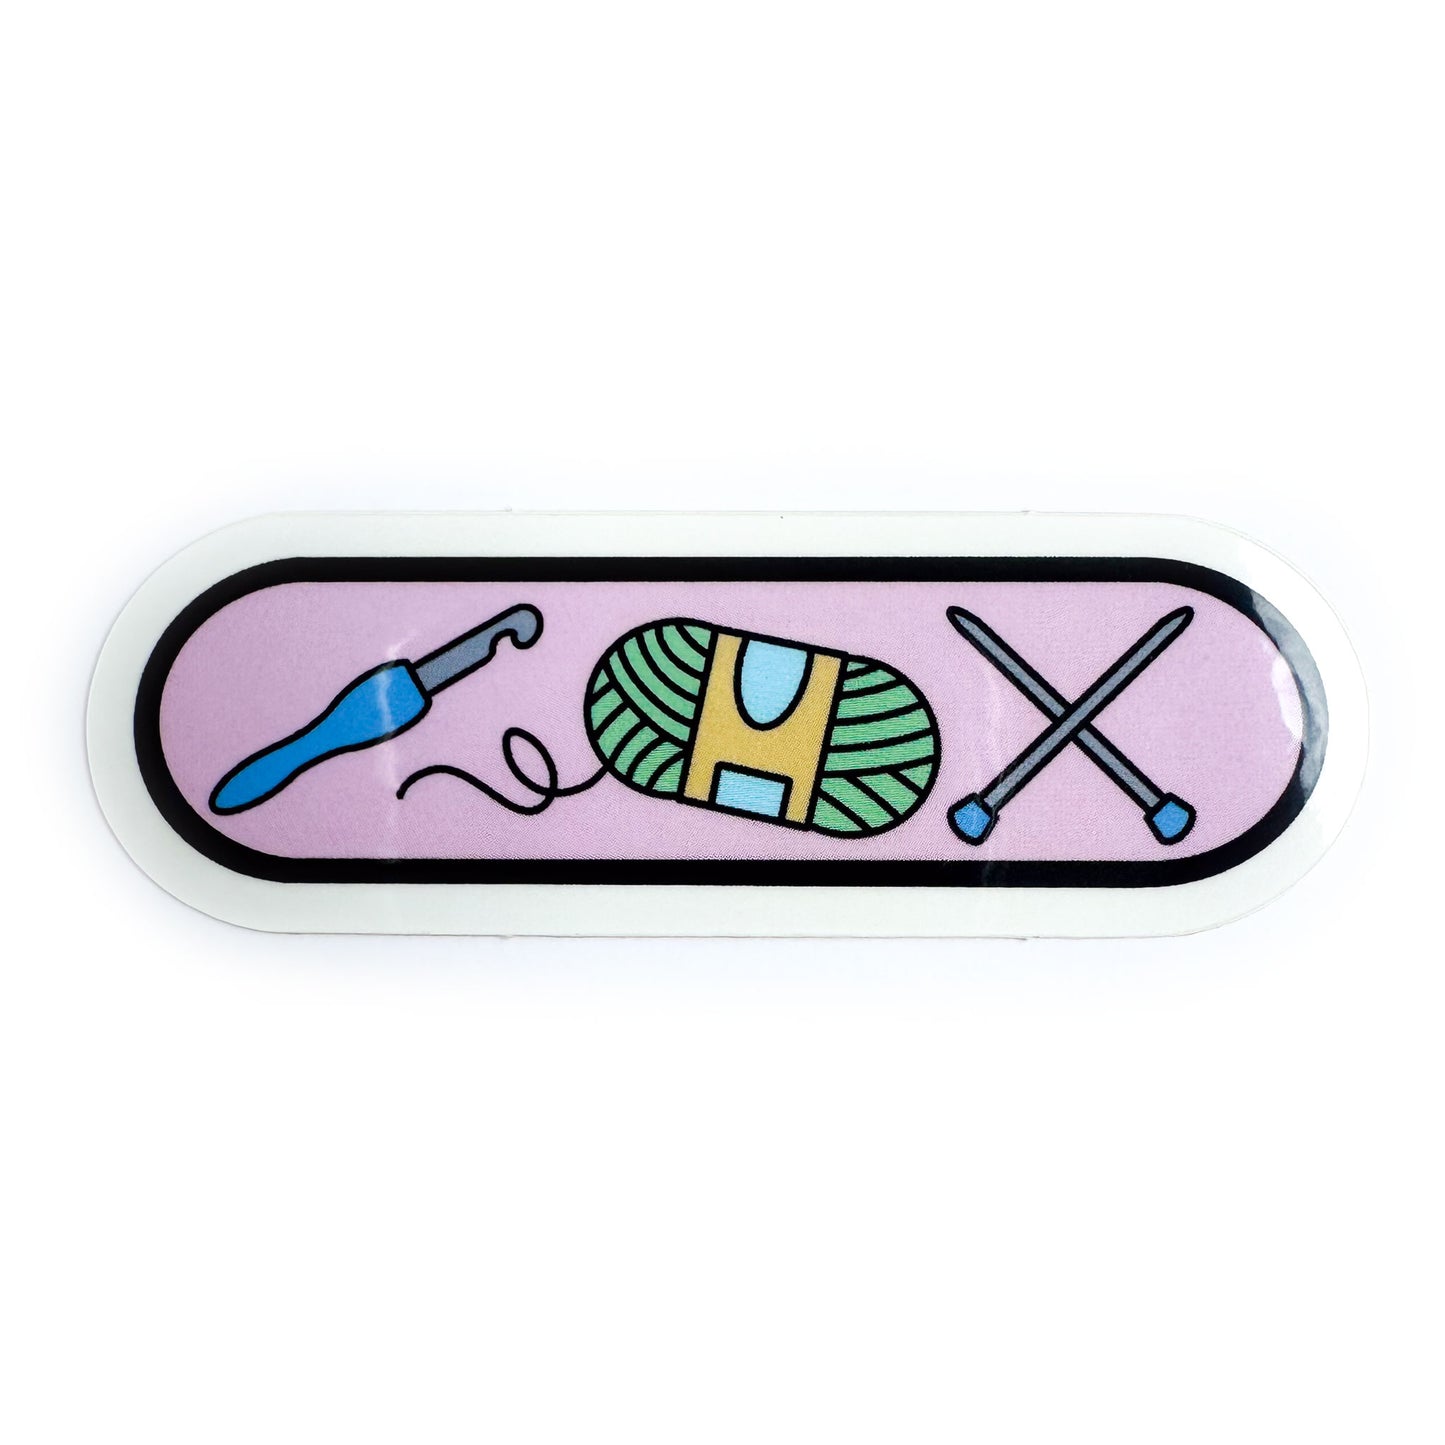 An oval shaped sticker with illustrations of a crochet hook, knitting needles, and a yarn ball on a pastel pink background. 